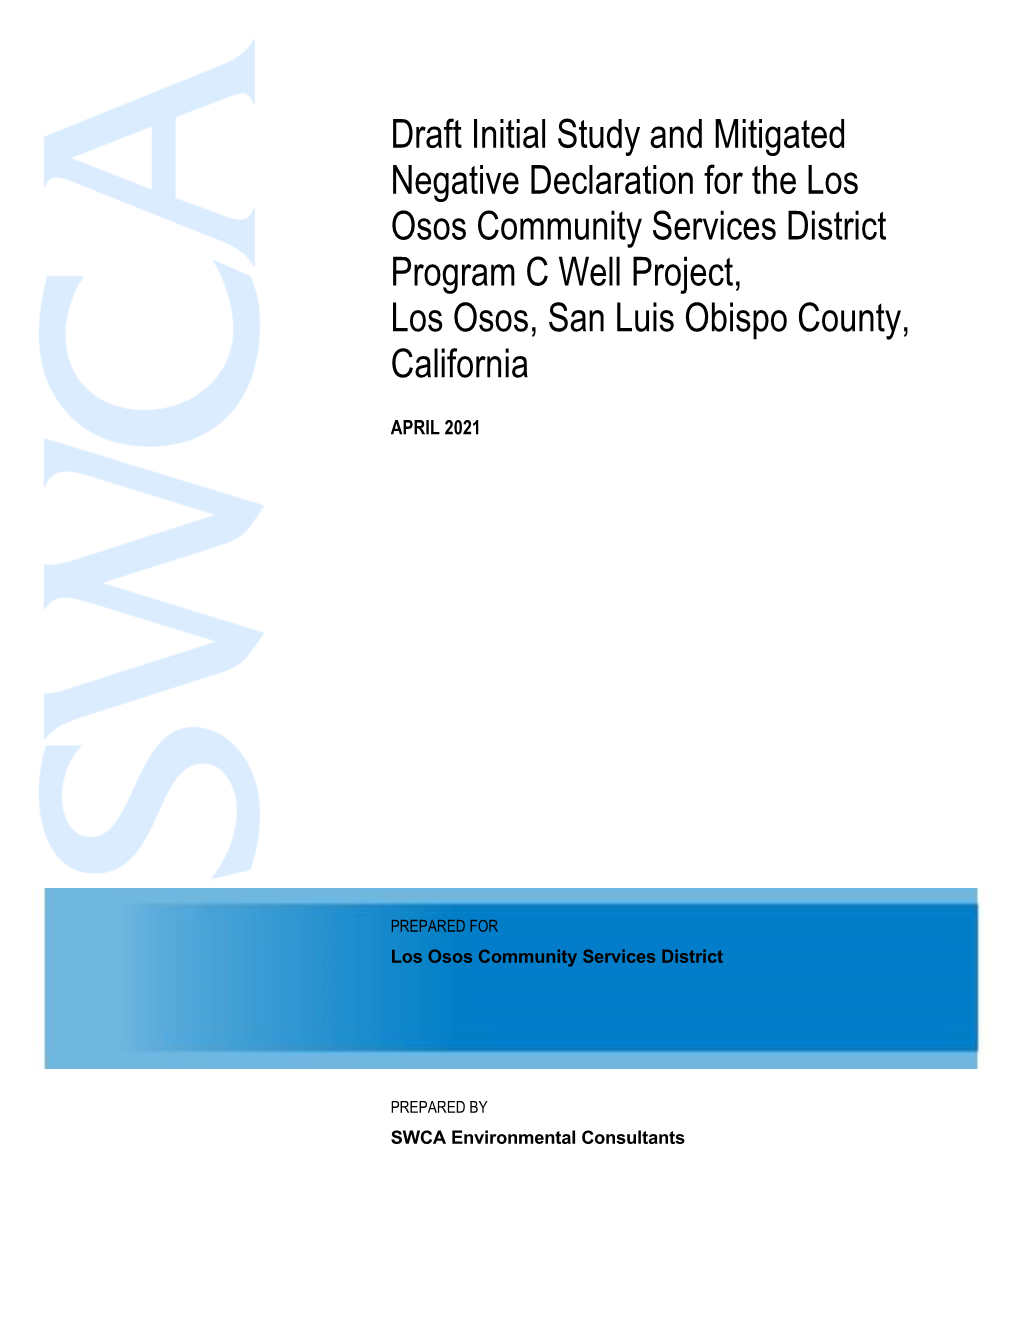 Draft Initial Study and Mitigated Negative Declaration for the Los